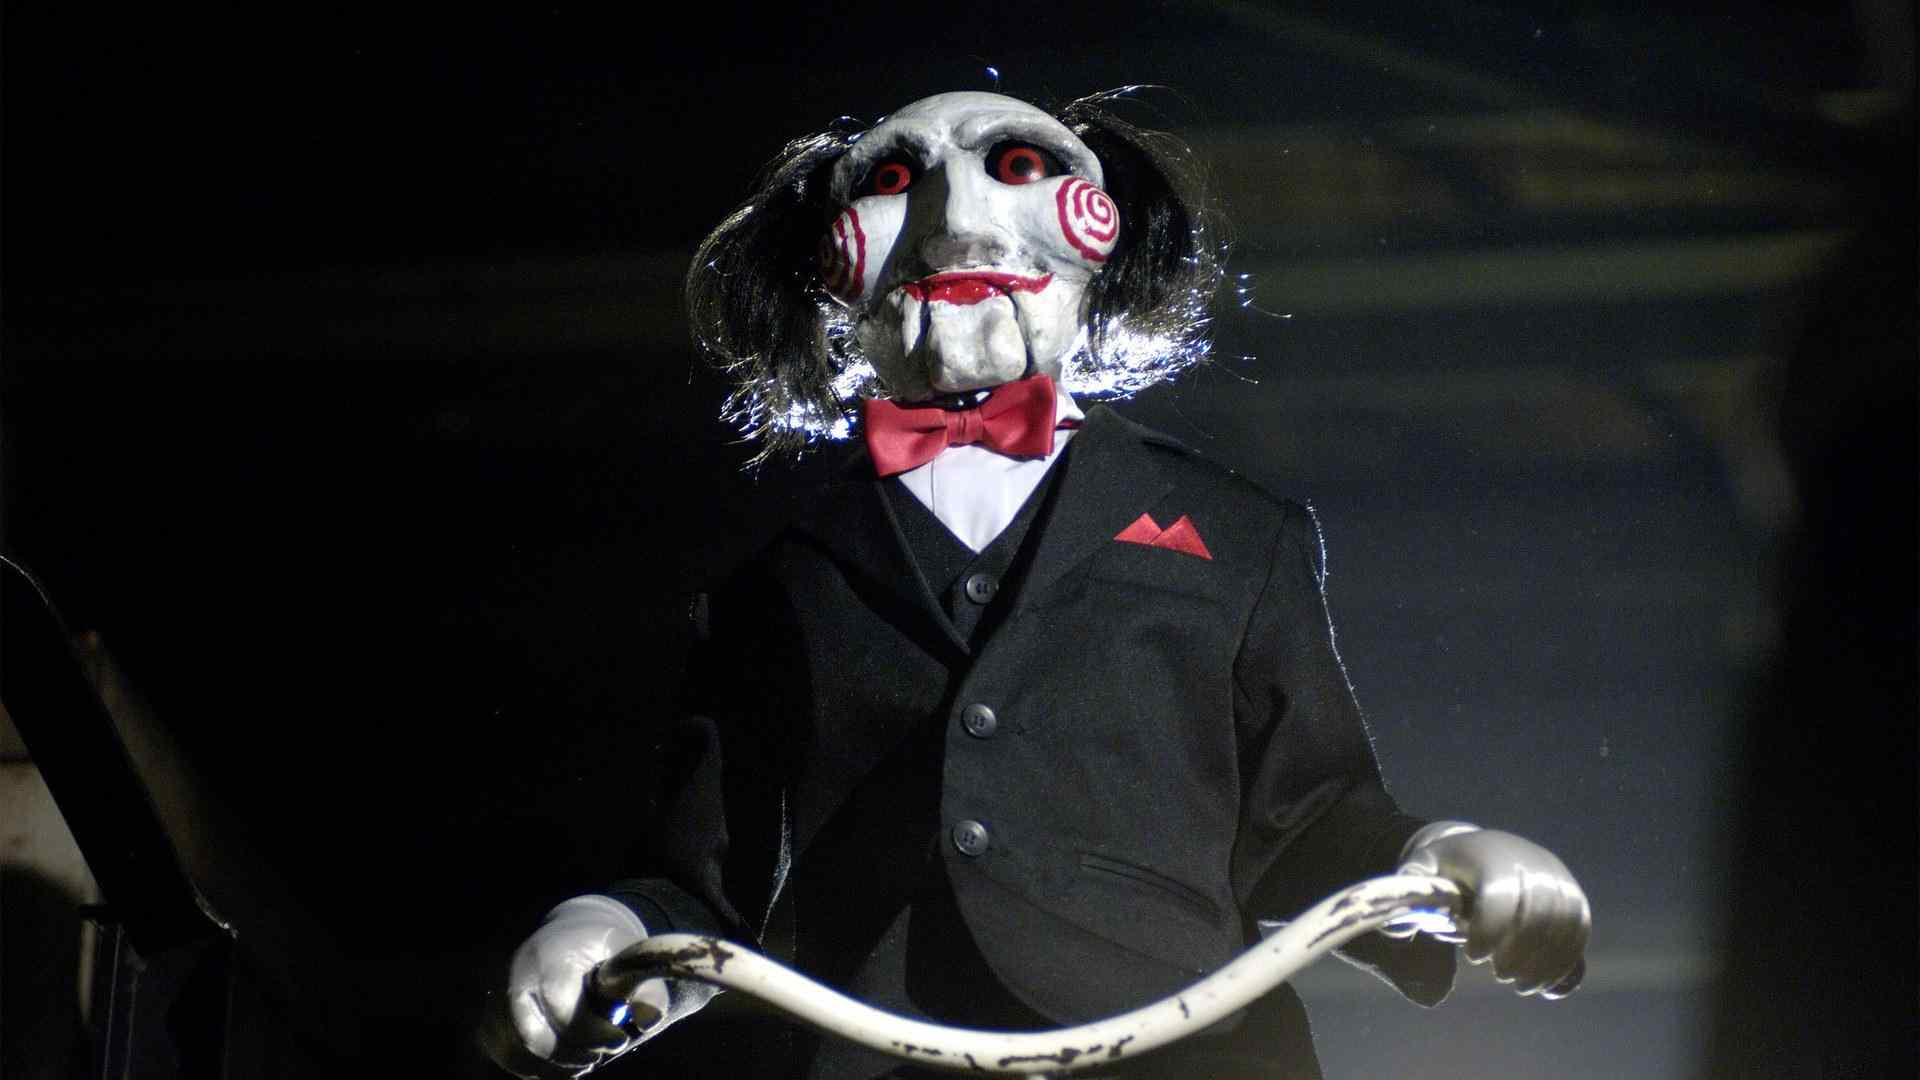 Billy the puppet in the hit Saw movie franchise.